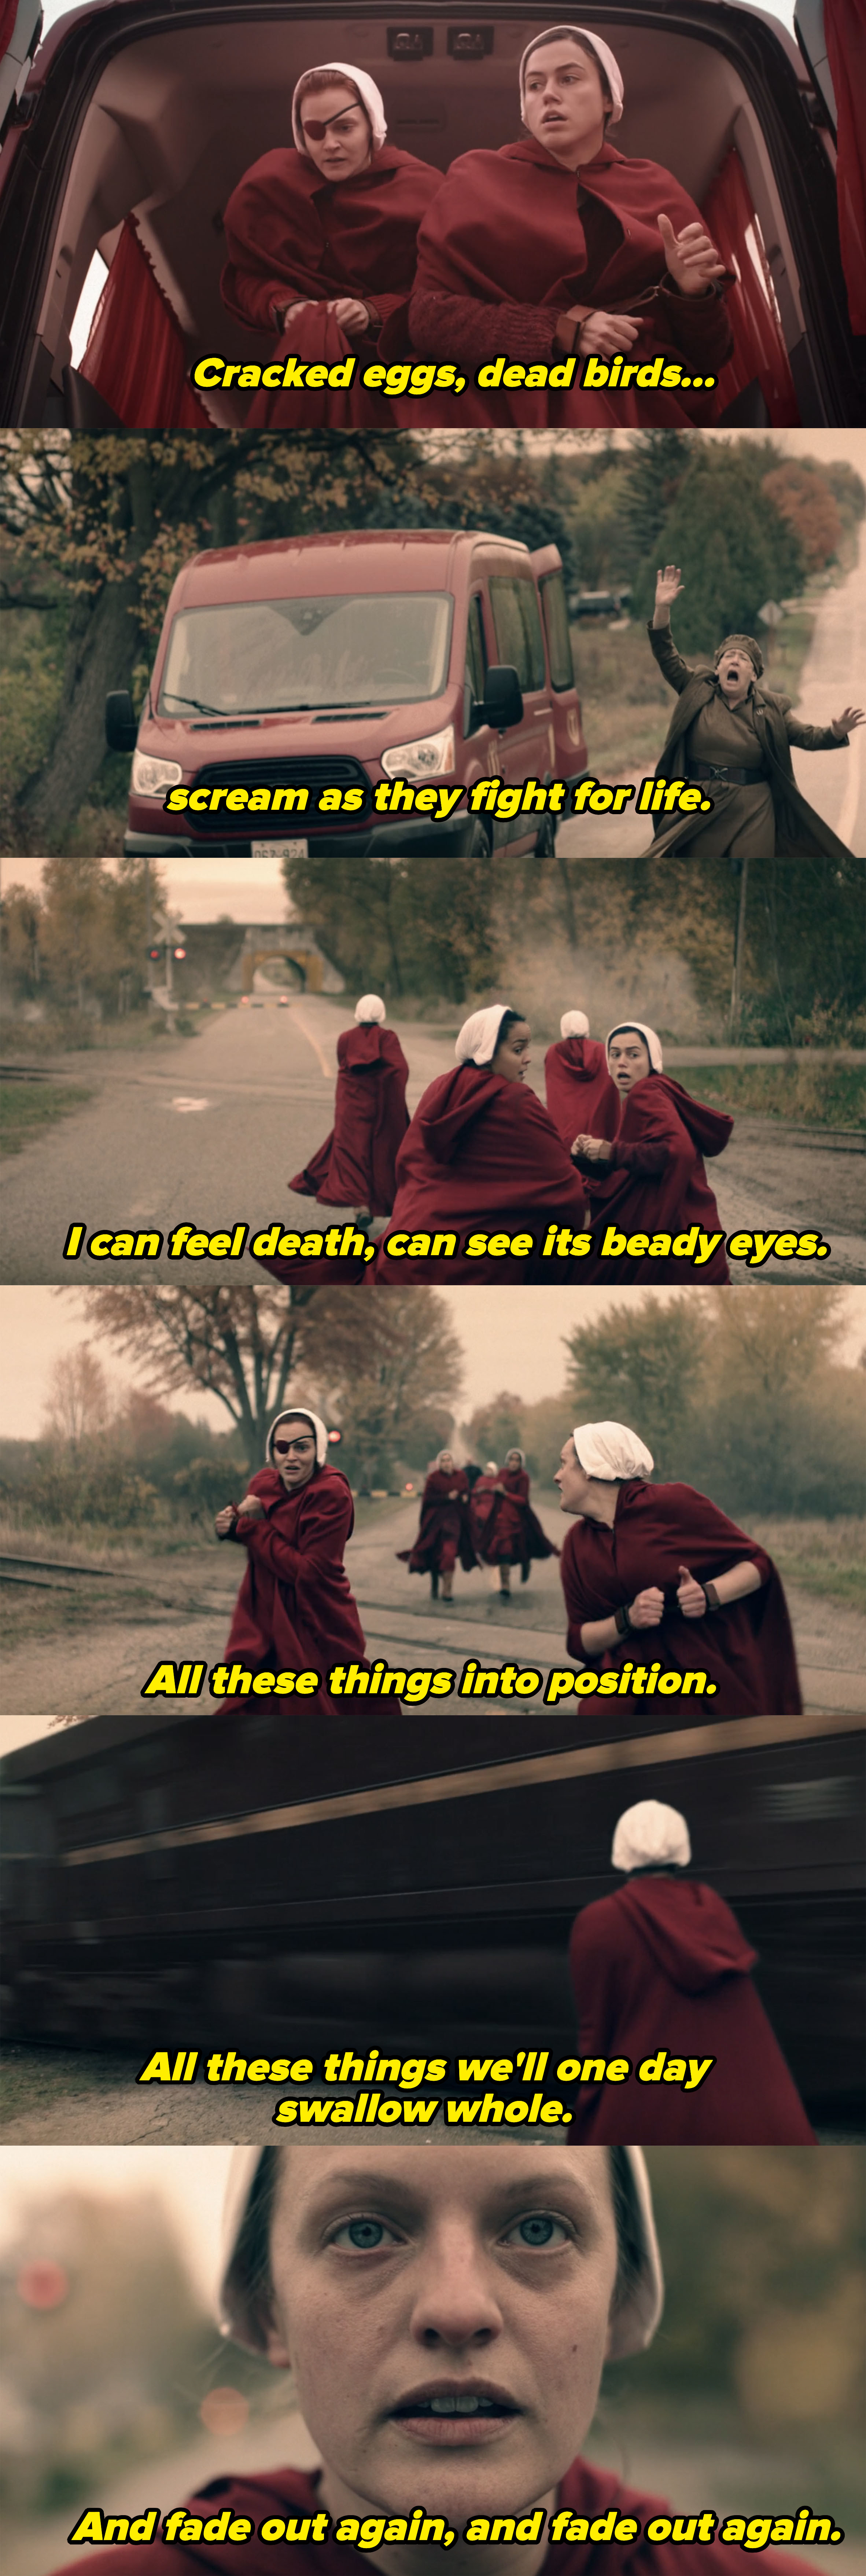 Screenshot from &quot;The Handmaid&#x27;s Tale&quot;